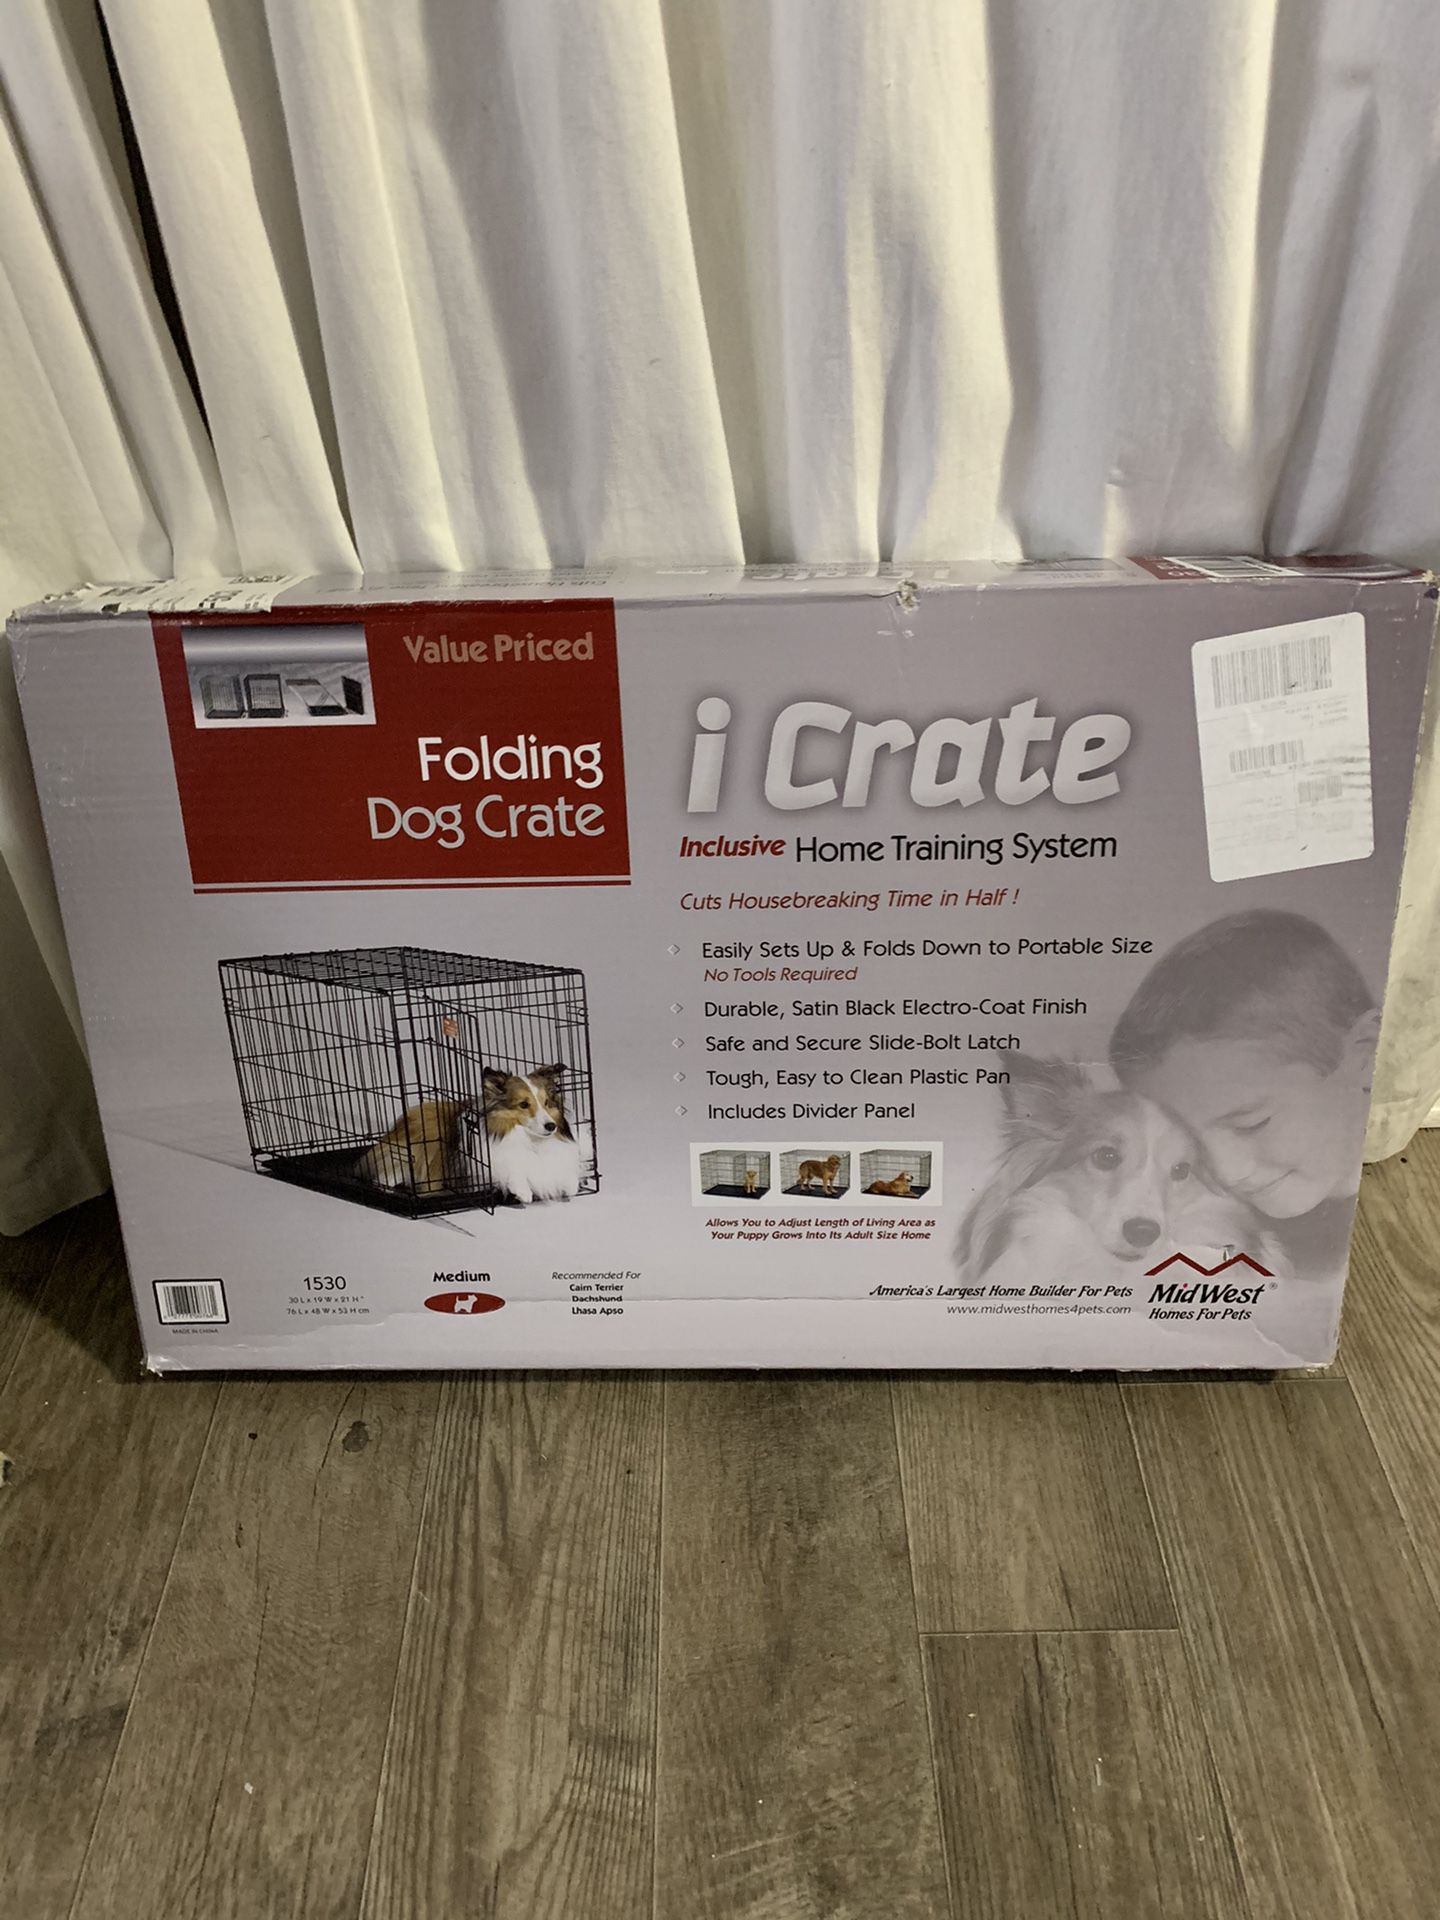 Folding Dog Crate - New in Box